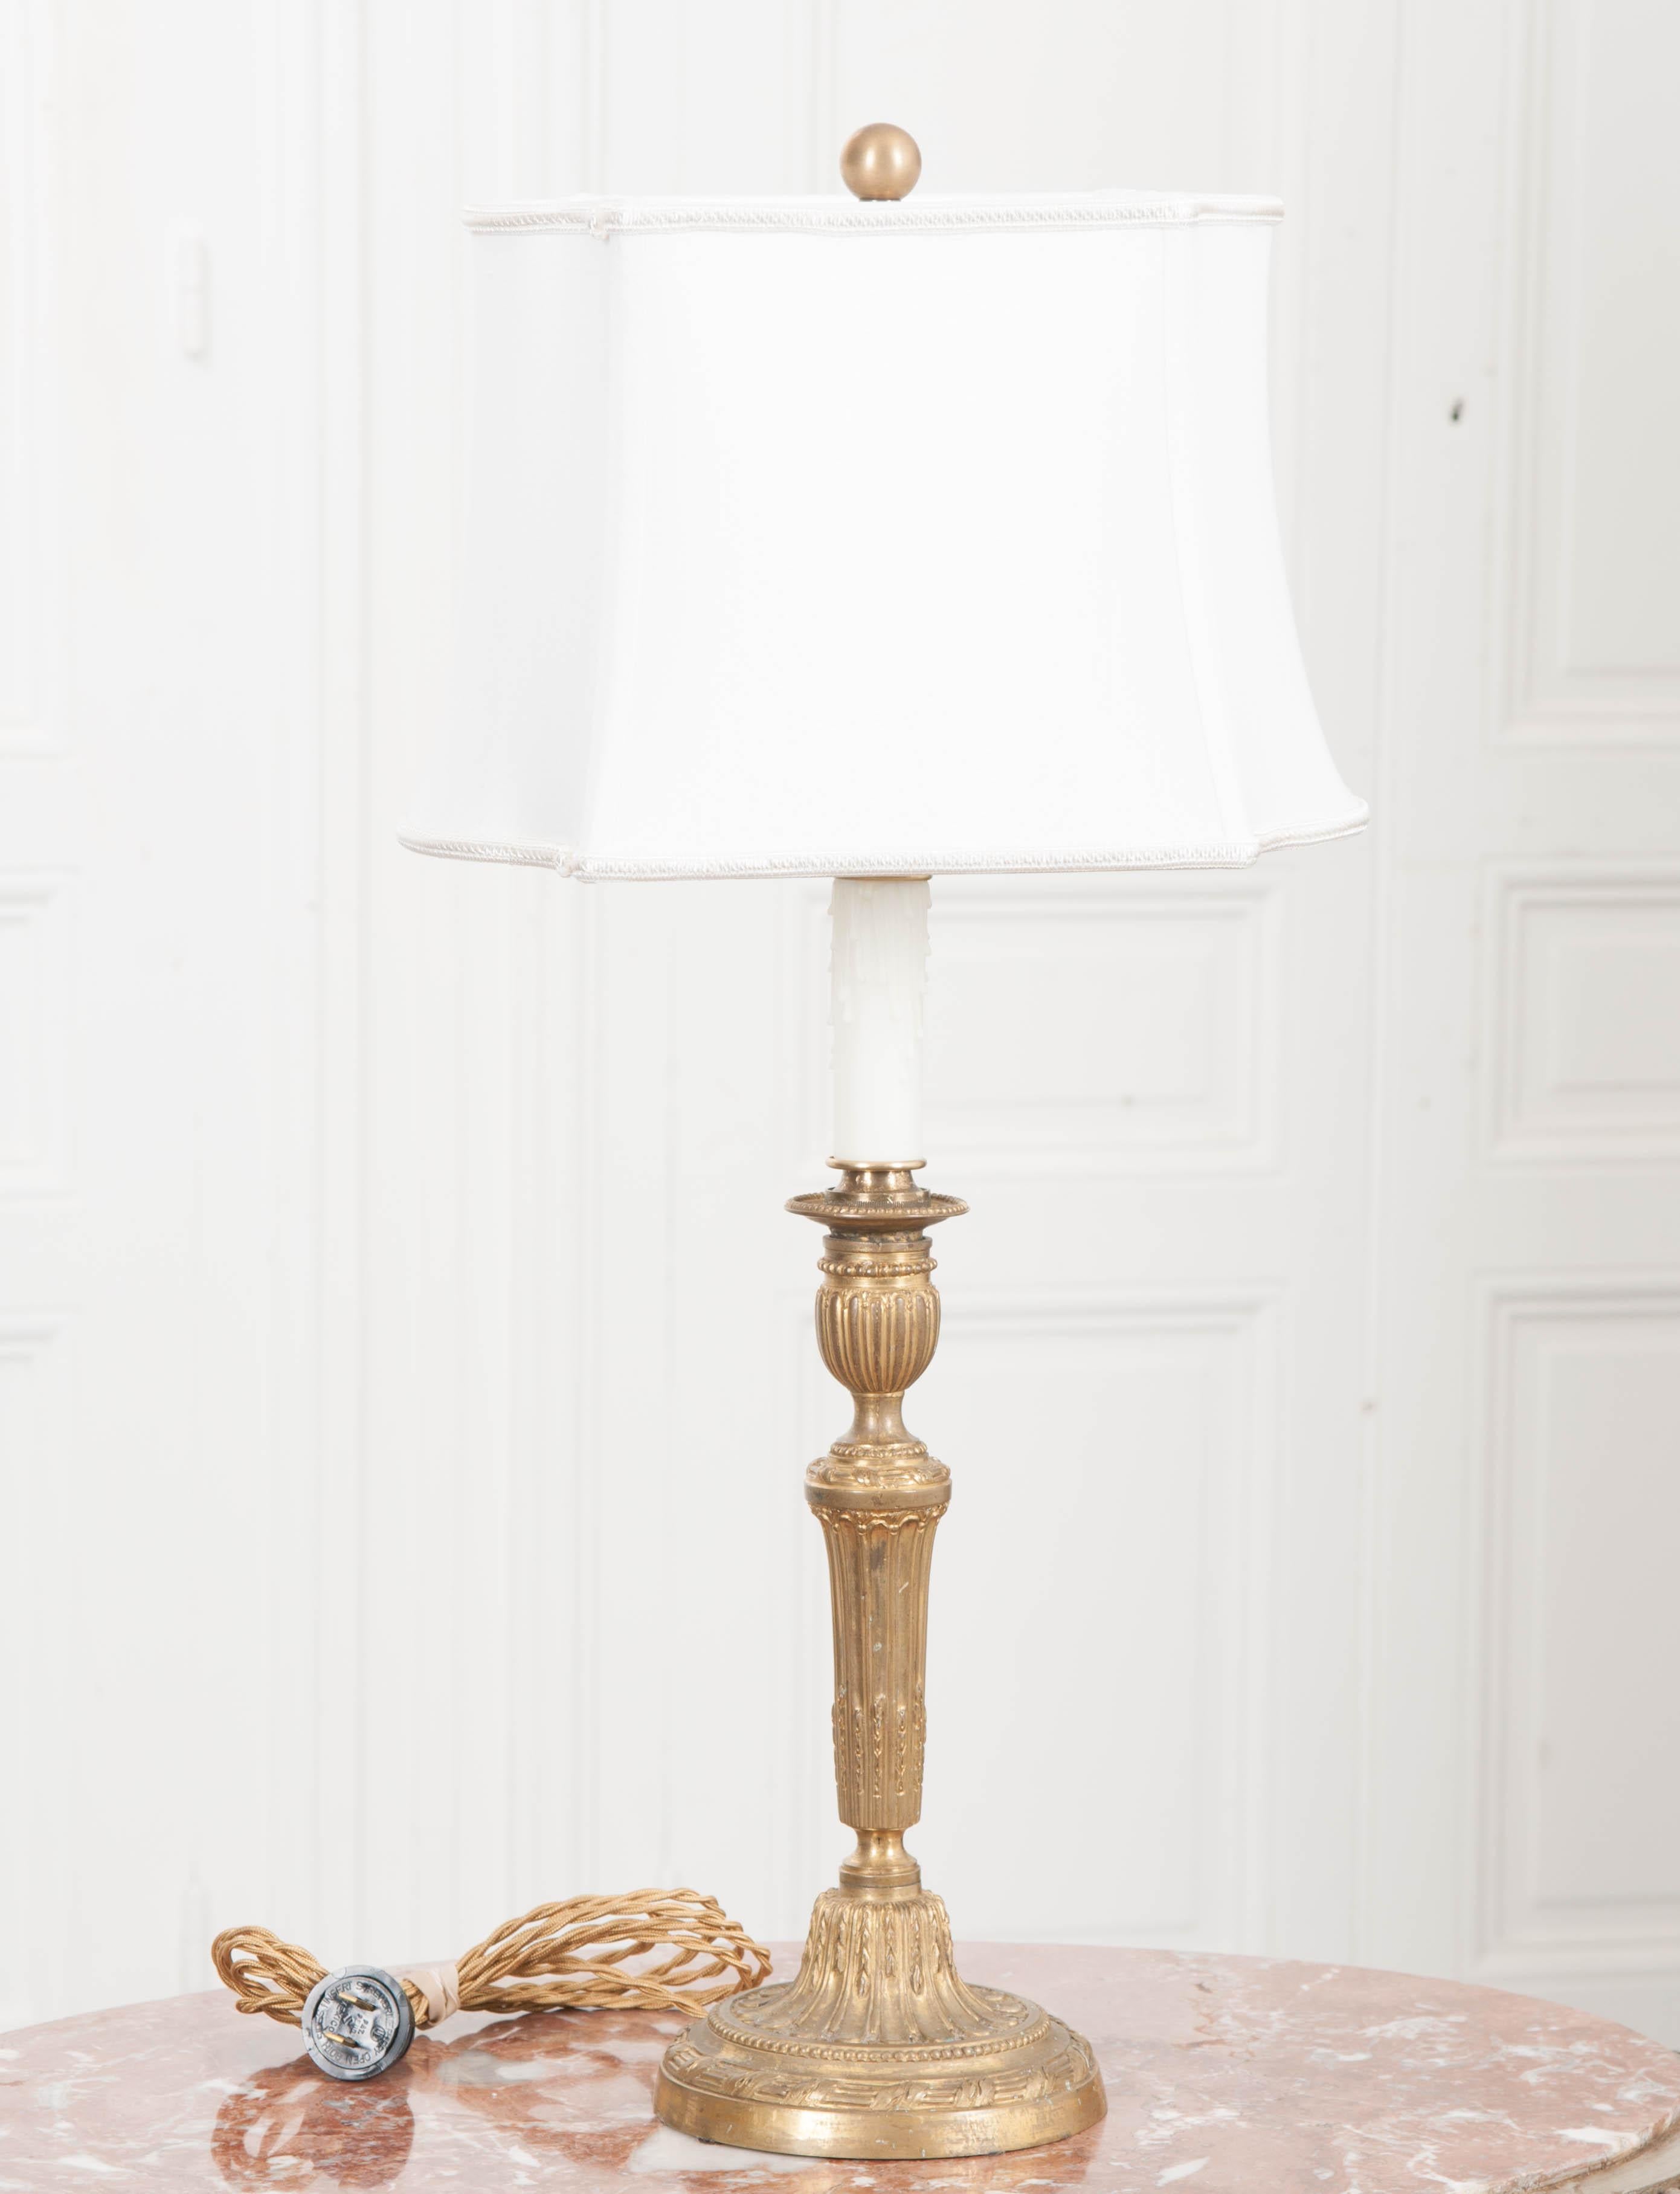 The standard for this diminutive single-light table lamp is a Louis XVI style reeded brass candlestick, circa 1860s, found in France. The custom shaped rectangular shade is ivory linen and topped with a brass ball finial. UL approved wiring for the